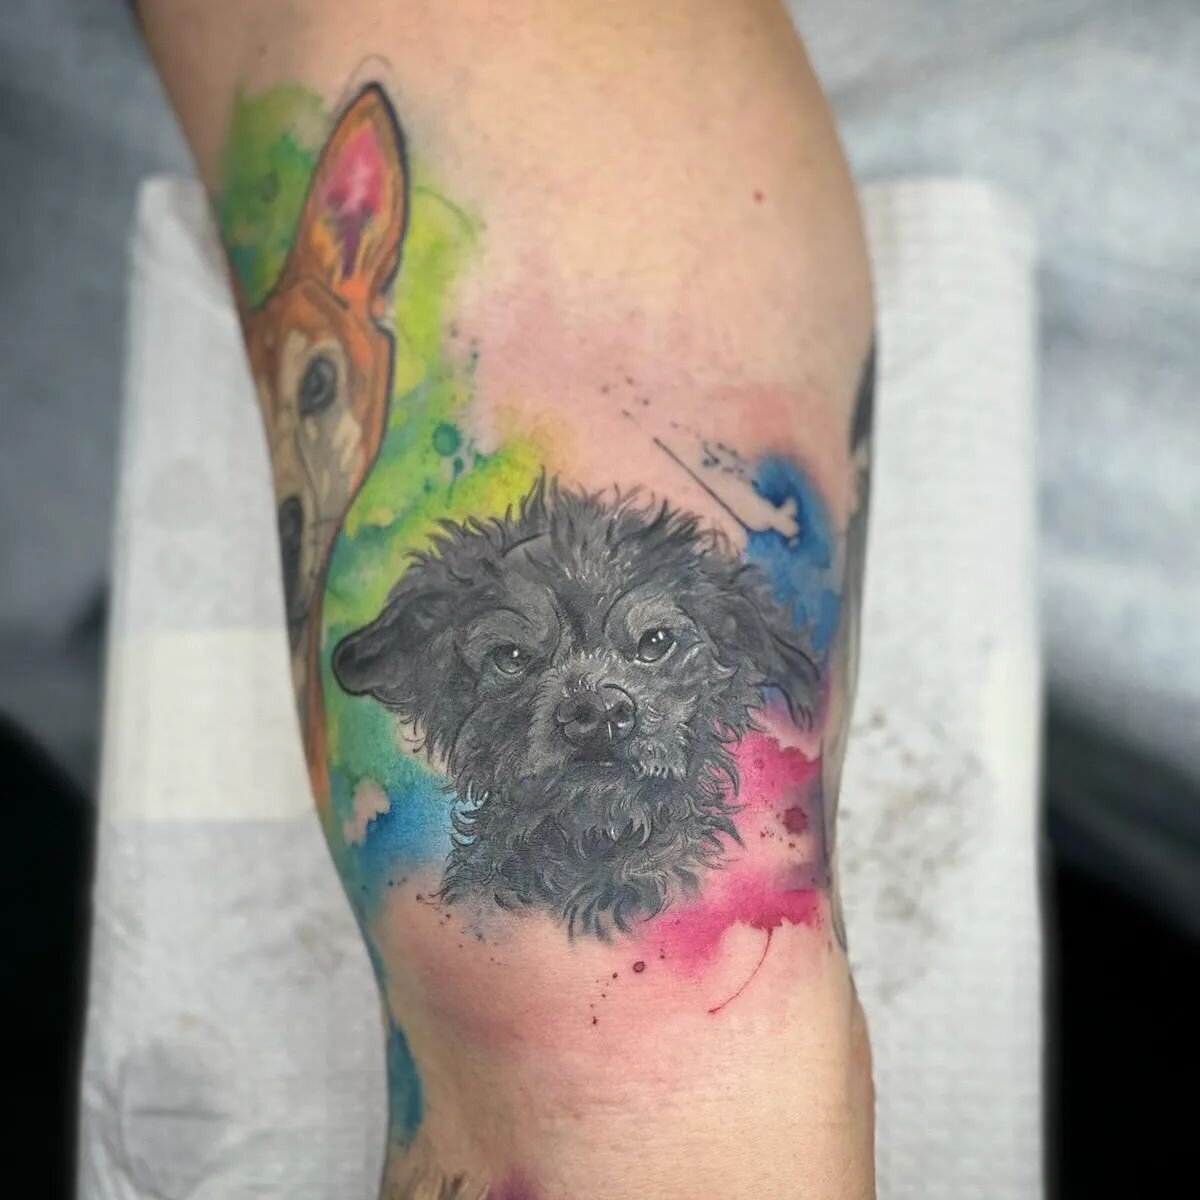 MINI DOG PORTRAIT!!! This is actually one of the last parts of a full sleeve of my clients rescues. It's been a really fulfilling project. 
Anyway, this is about as mini as my pet portraits will get! 😁I had a lot of fun tattooing this little wirey p